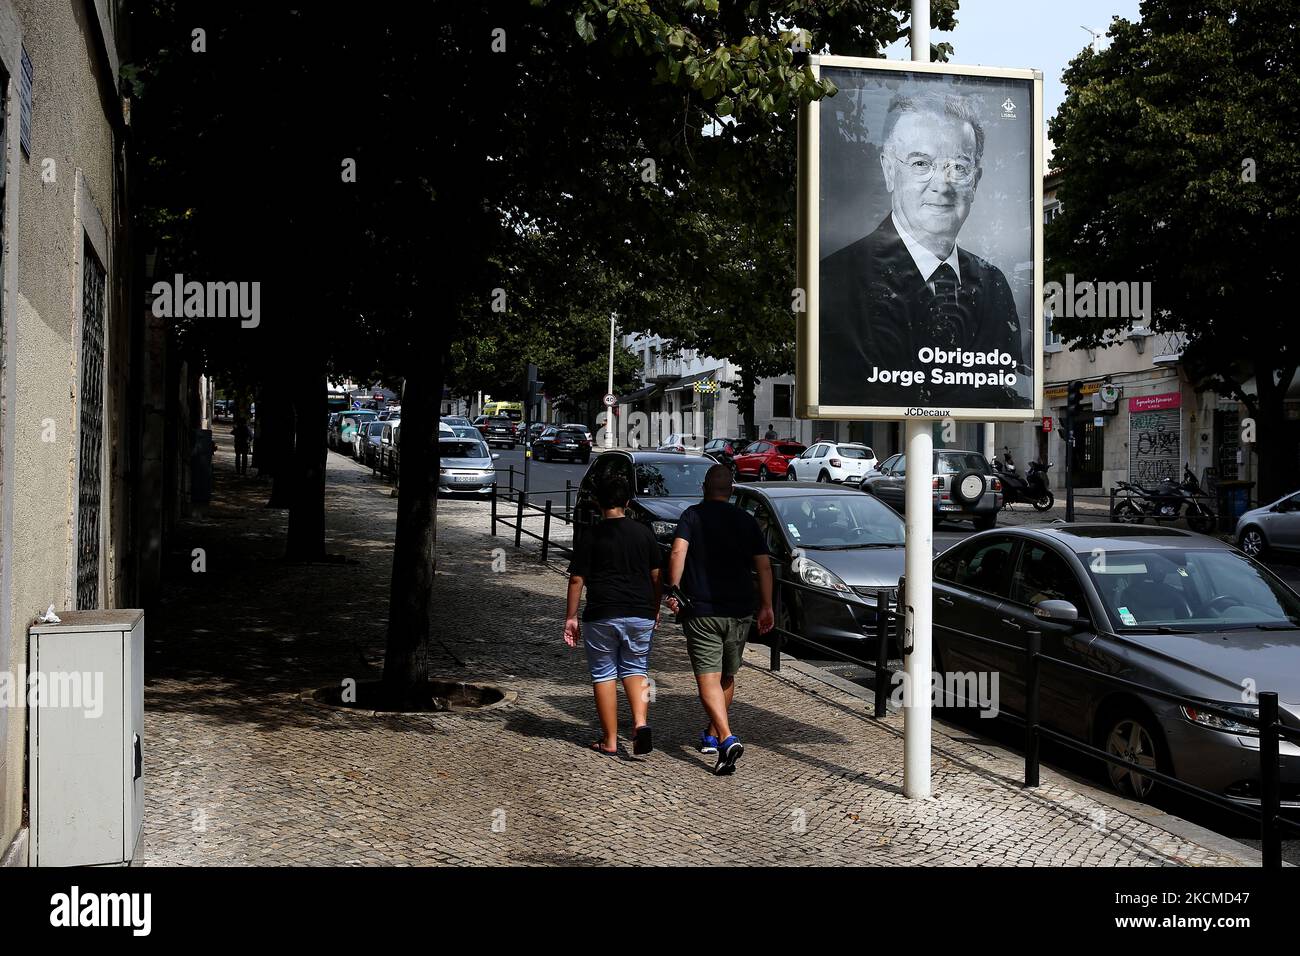 An advertisement saying 'Thank you Jorge Sampaio' is seen in Lisbon, Portugal, on September 12, 2021. Thousands paid their respects today, the second of three days of national mourning, to Jorge Sampaio who served as president from 1996 to 2006, and died on September 10, at the age of 81. (Photo by Pedro FiÃºza/NurPhoto) Stock Photo